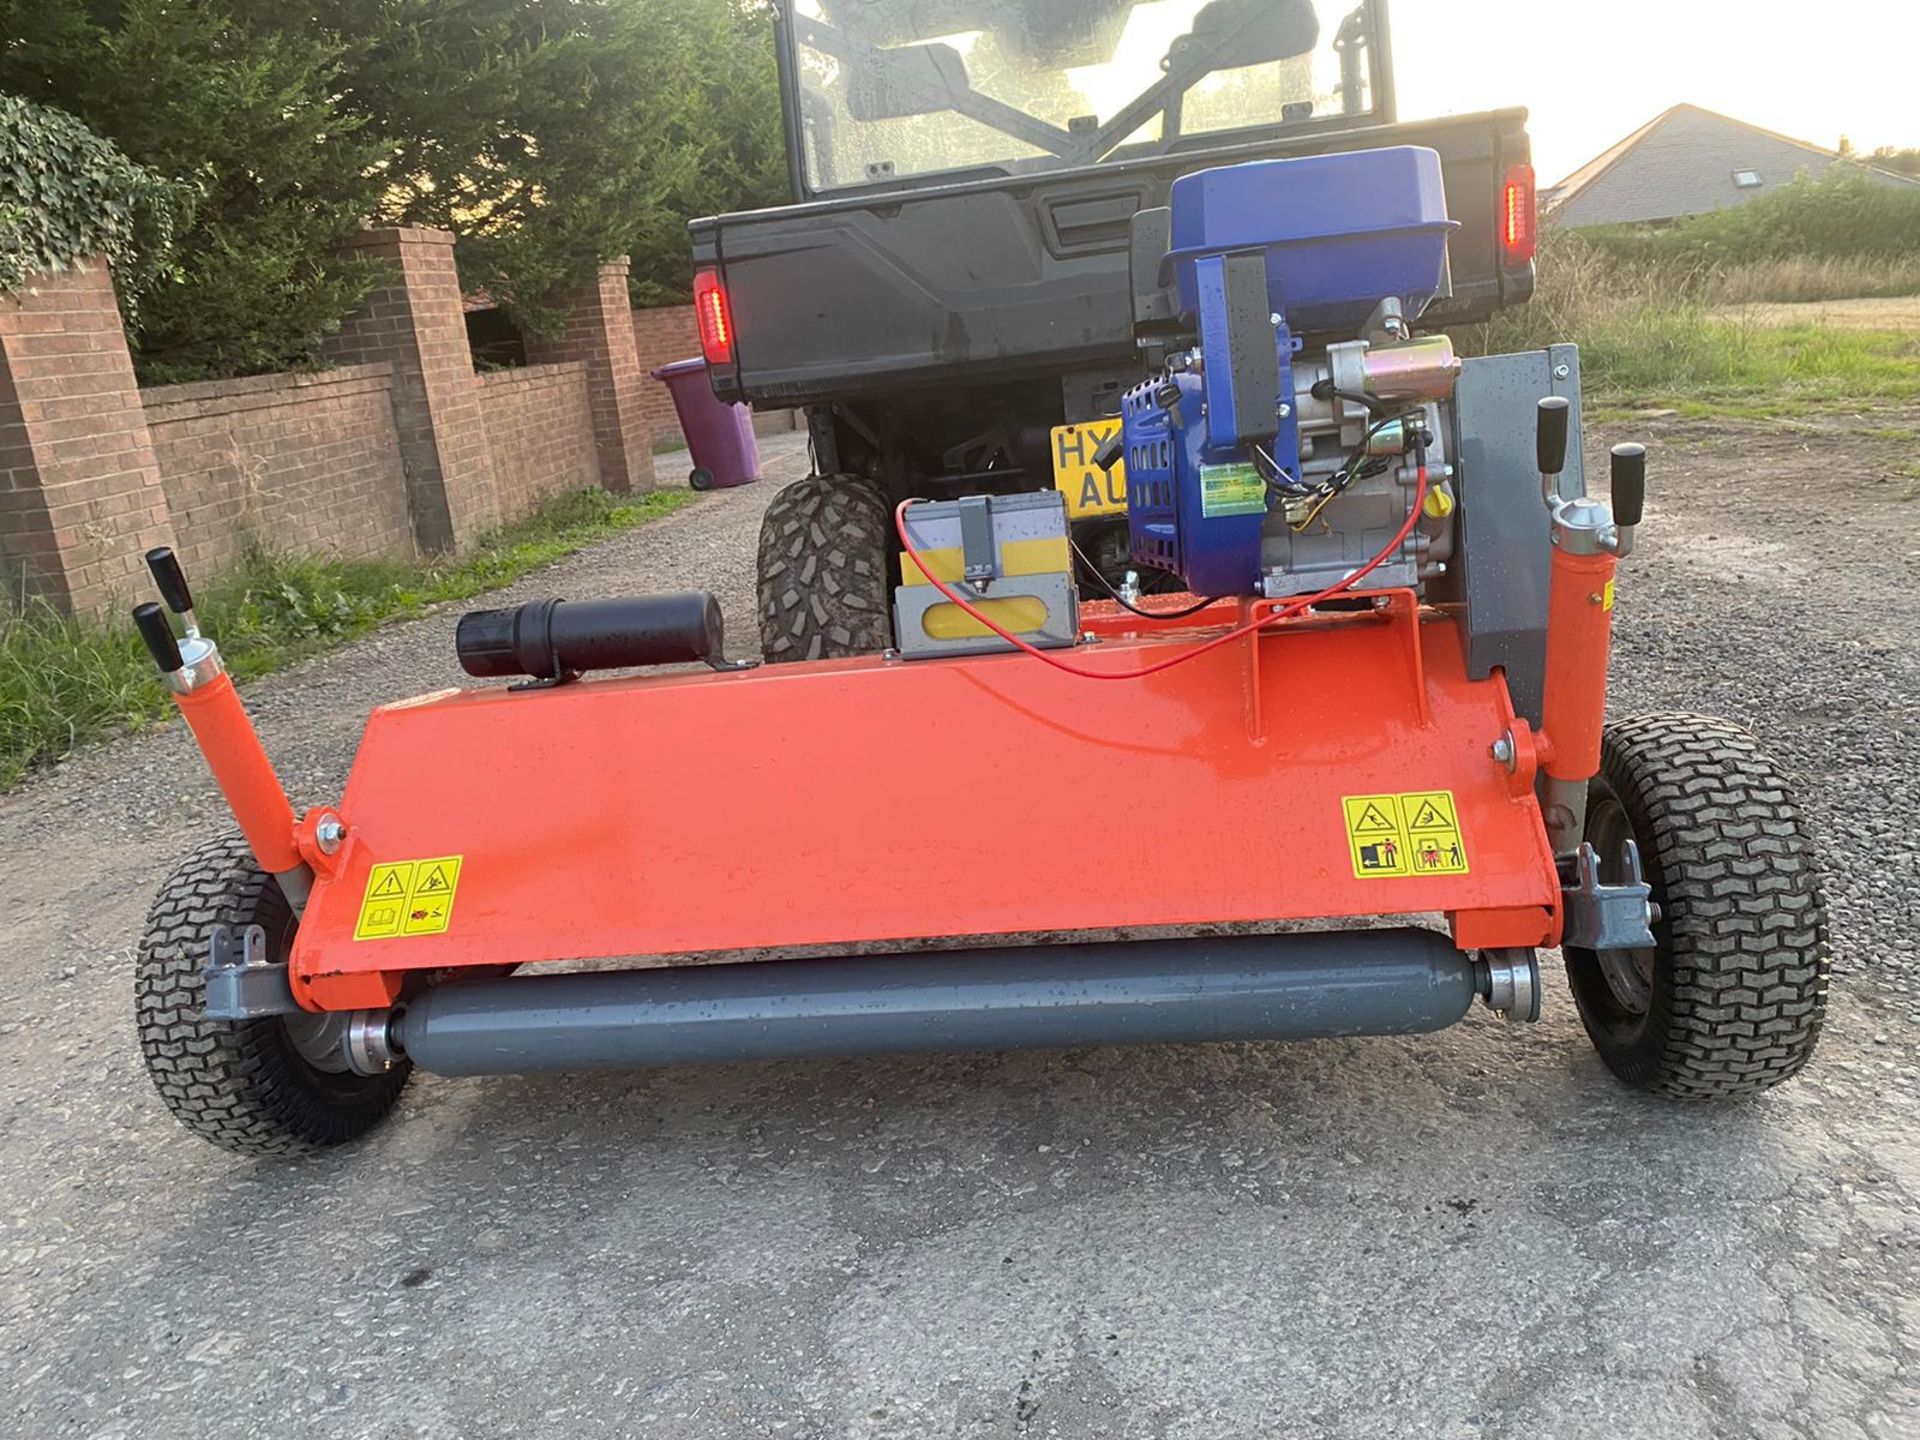 NEW AND UNUSED 1.2 METRE SINGLE AXLE FAST TOW FLAIL MOWER, SUITABLE FOR ATV / UTILITY VEHICLE - Image 4 of 8